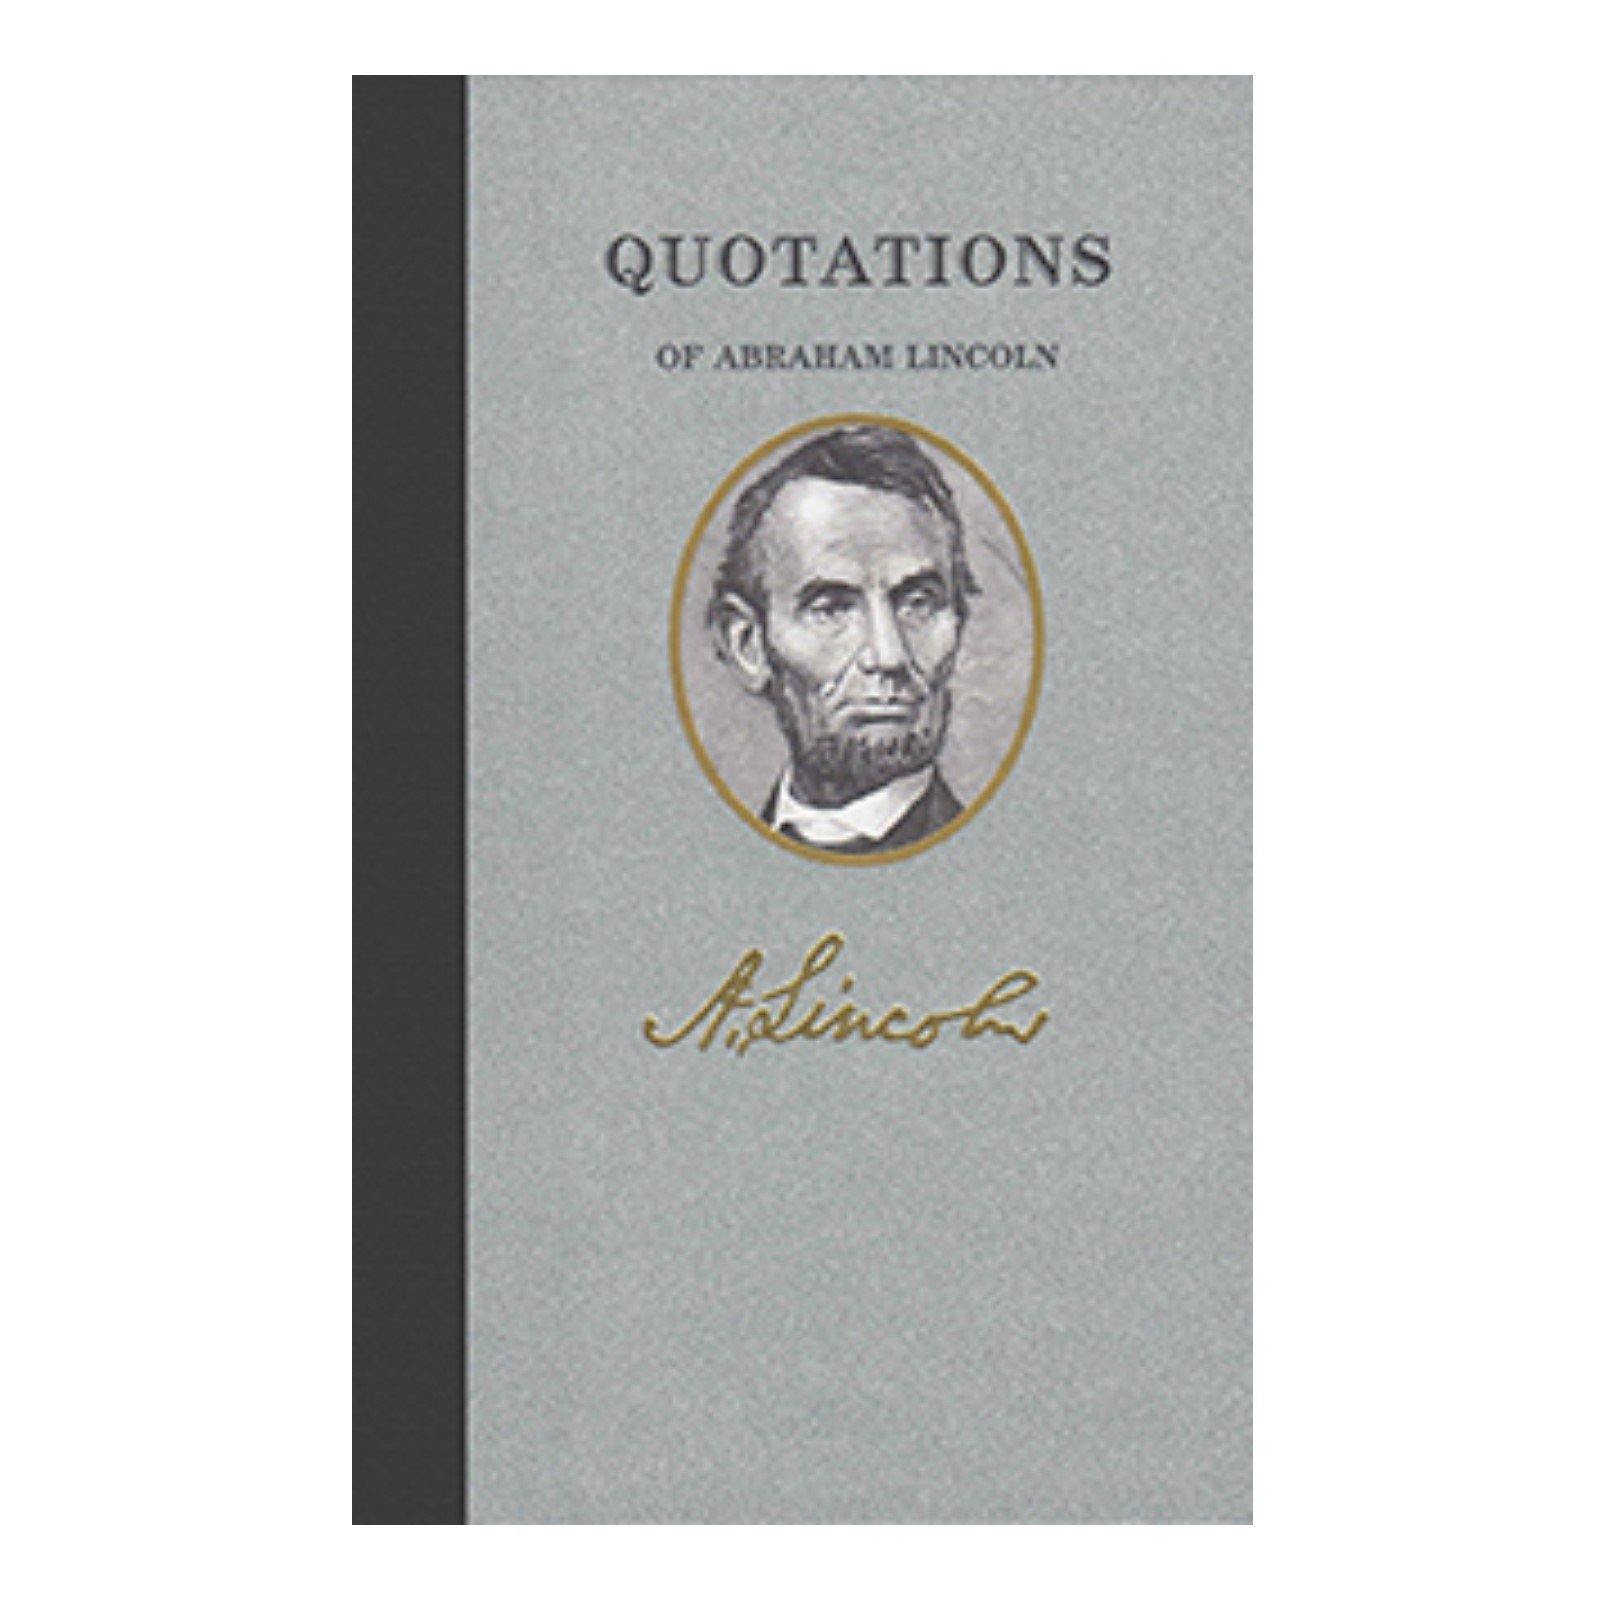 Quotations of Abraham Lincoln - Library of Congress Shop